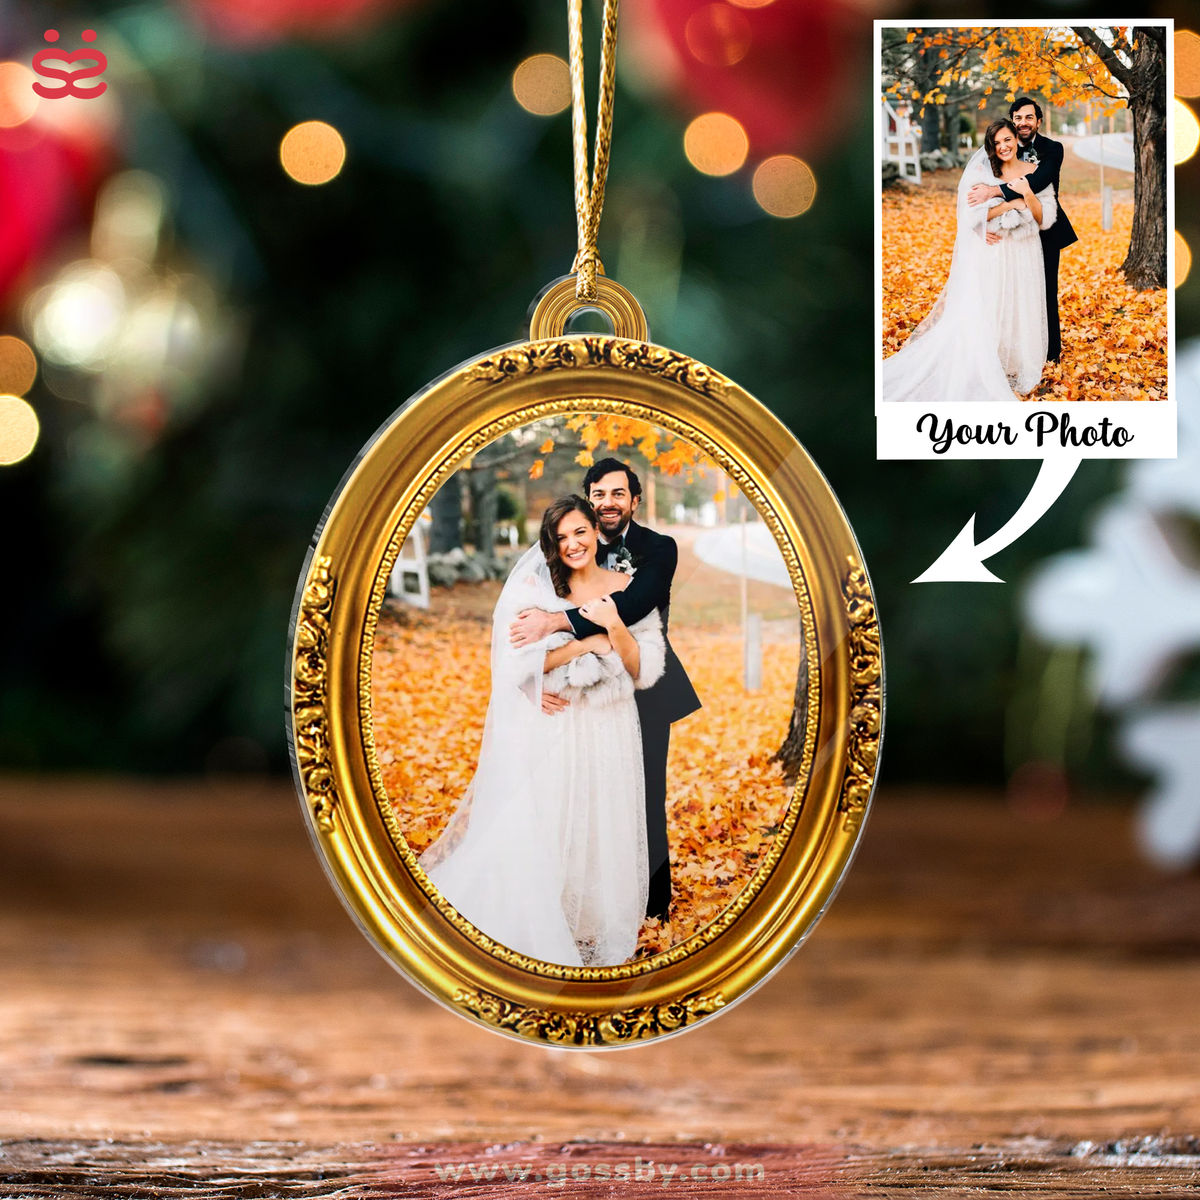 Photo Frame Keepsake Ornament - Customized Your Photo Ornaments - Couple Photo Gifts, Christmas Gifts for Couple